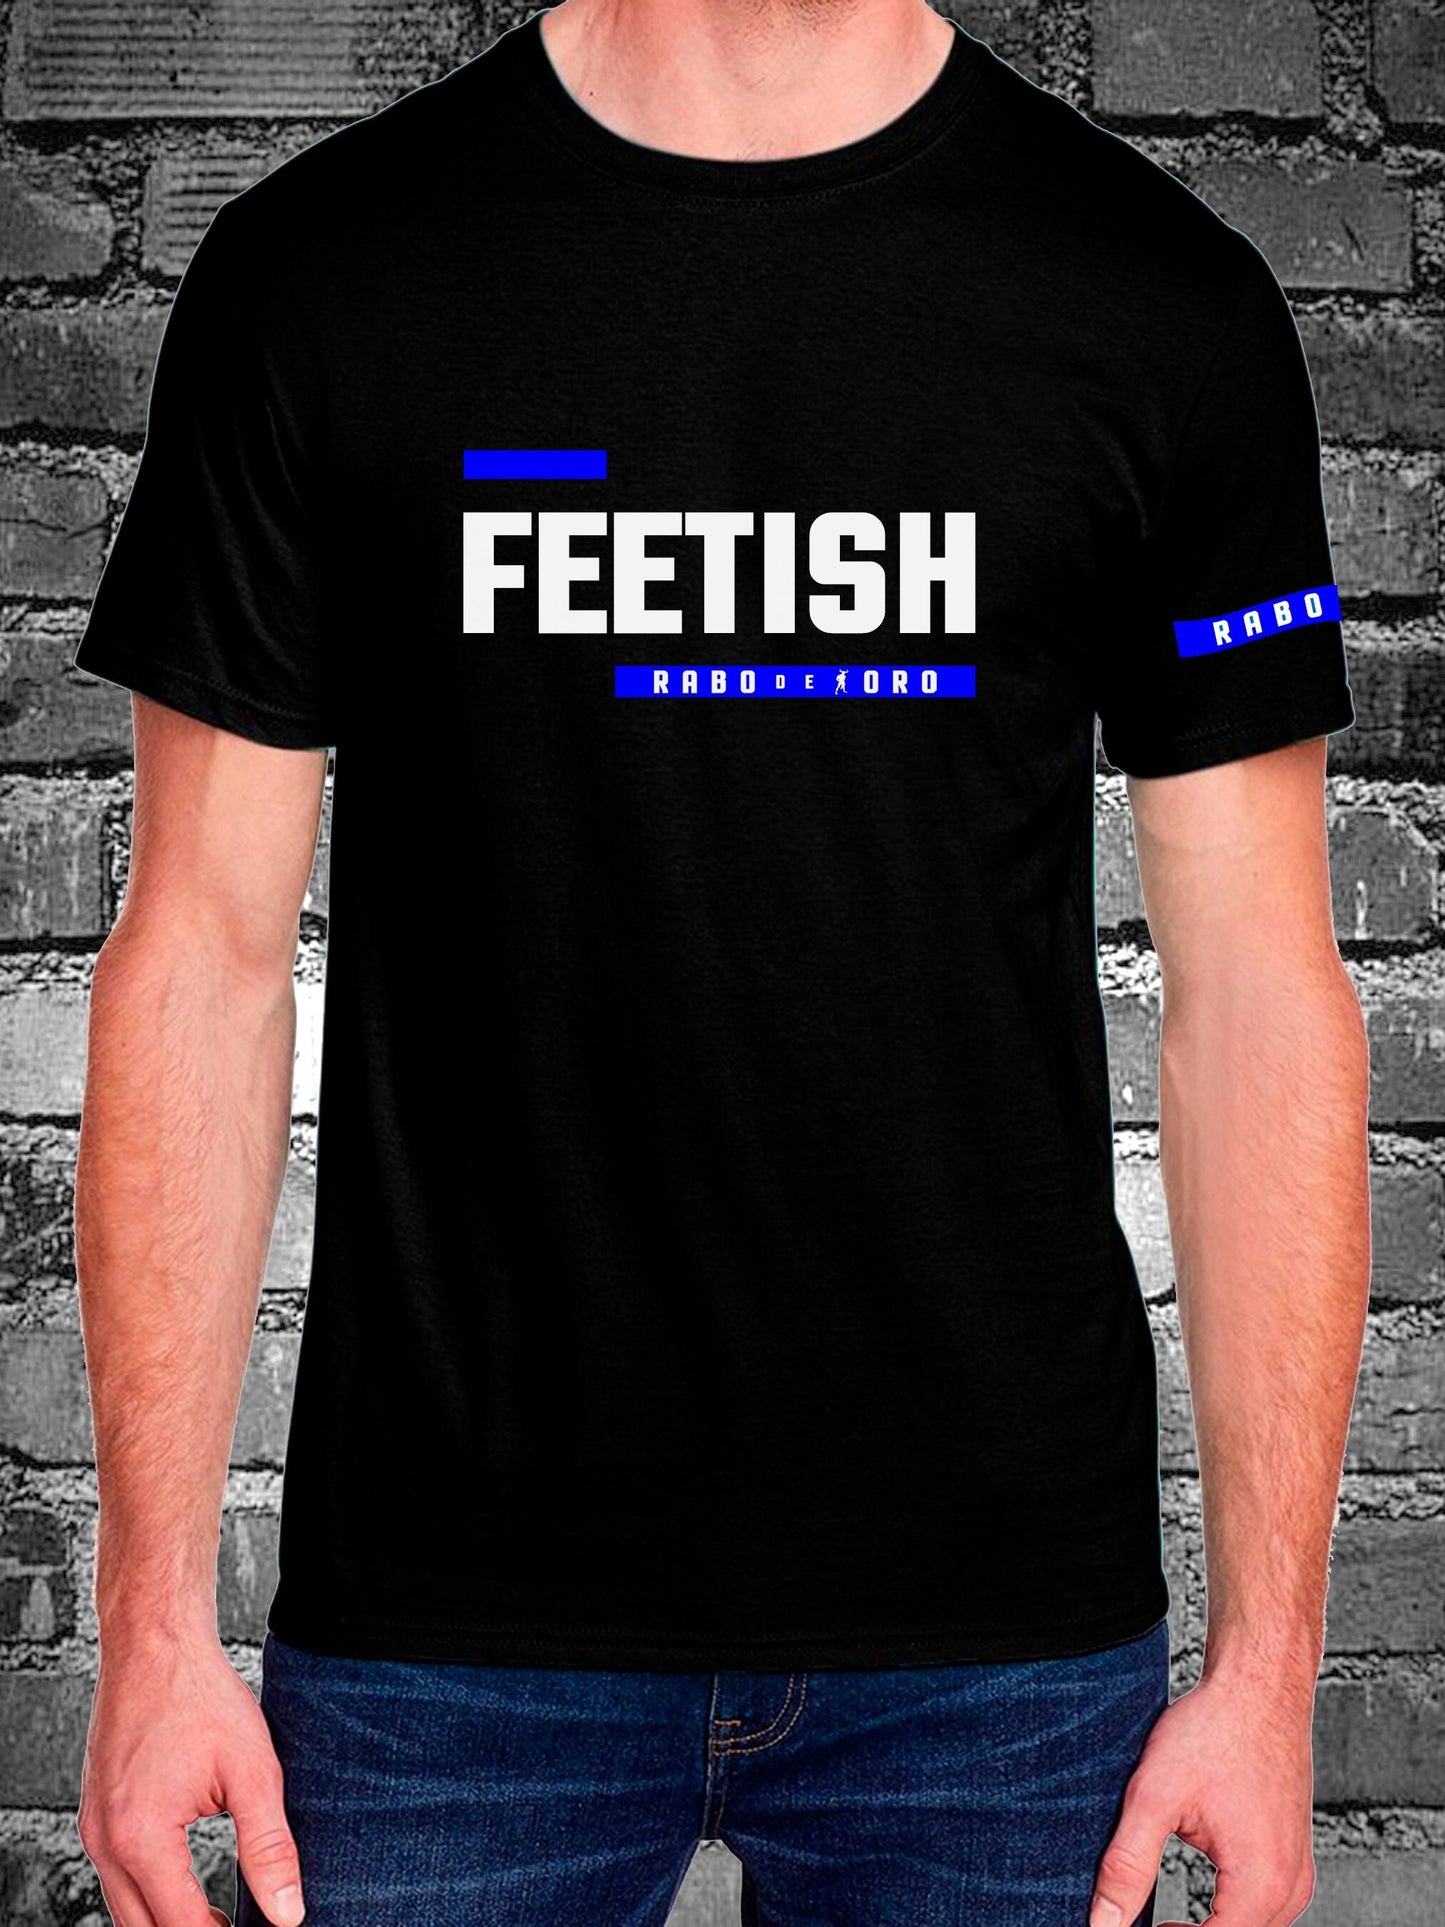 FEETISH Black T-Shirt with BDSM Hanky Code details